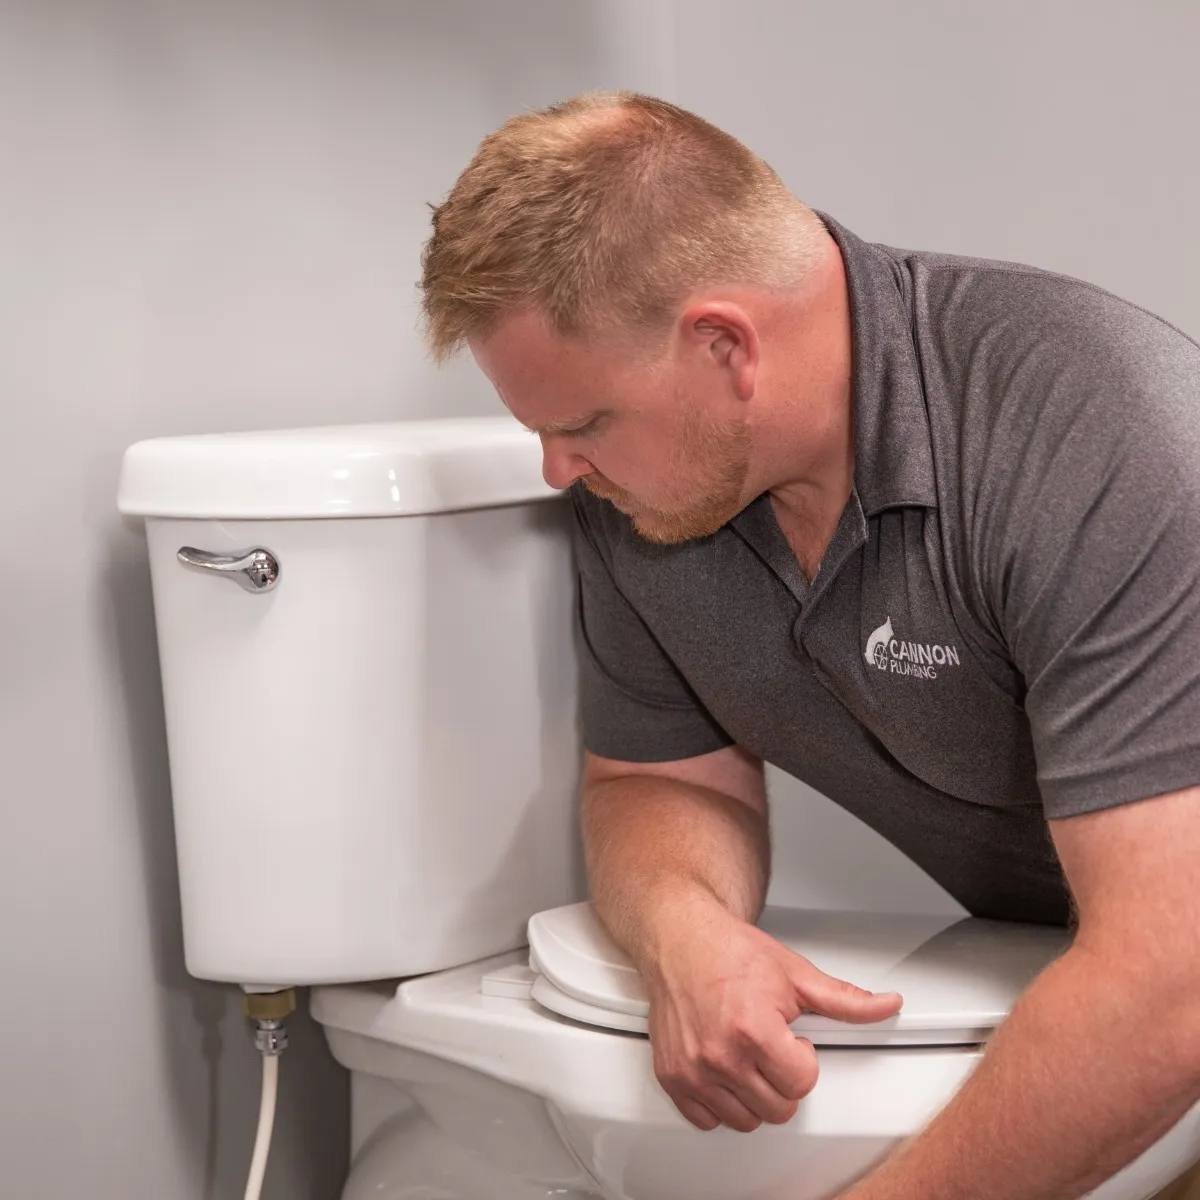 Trusted Plumbing Services in Woodbridge: Choose the Best